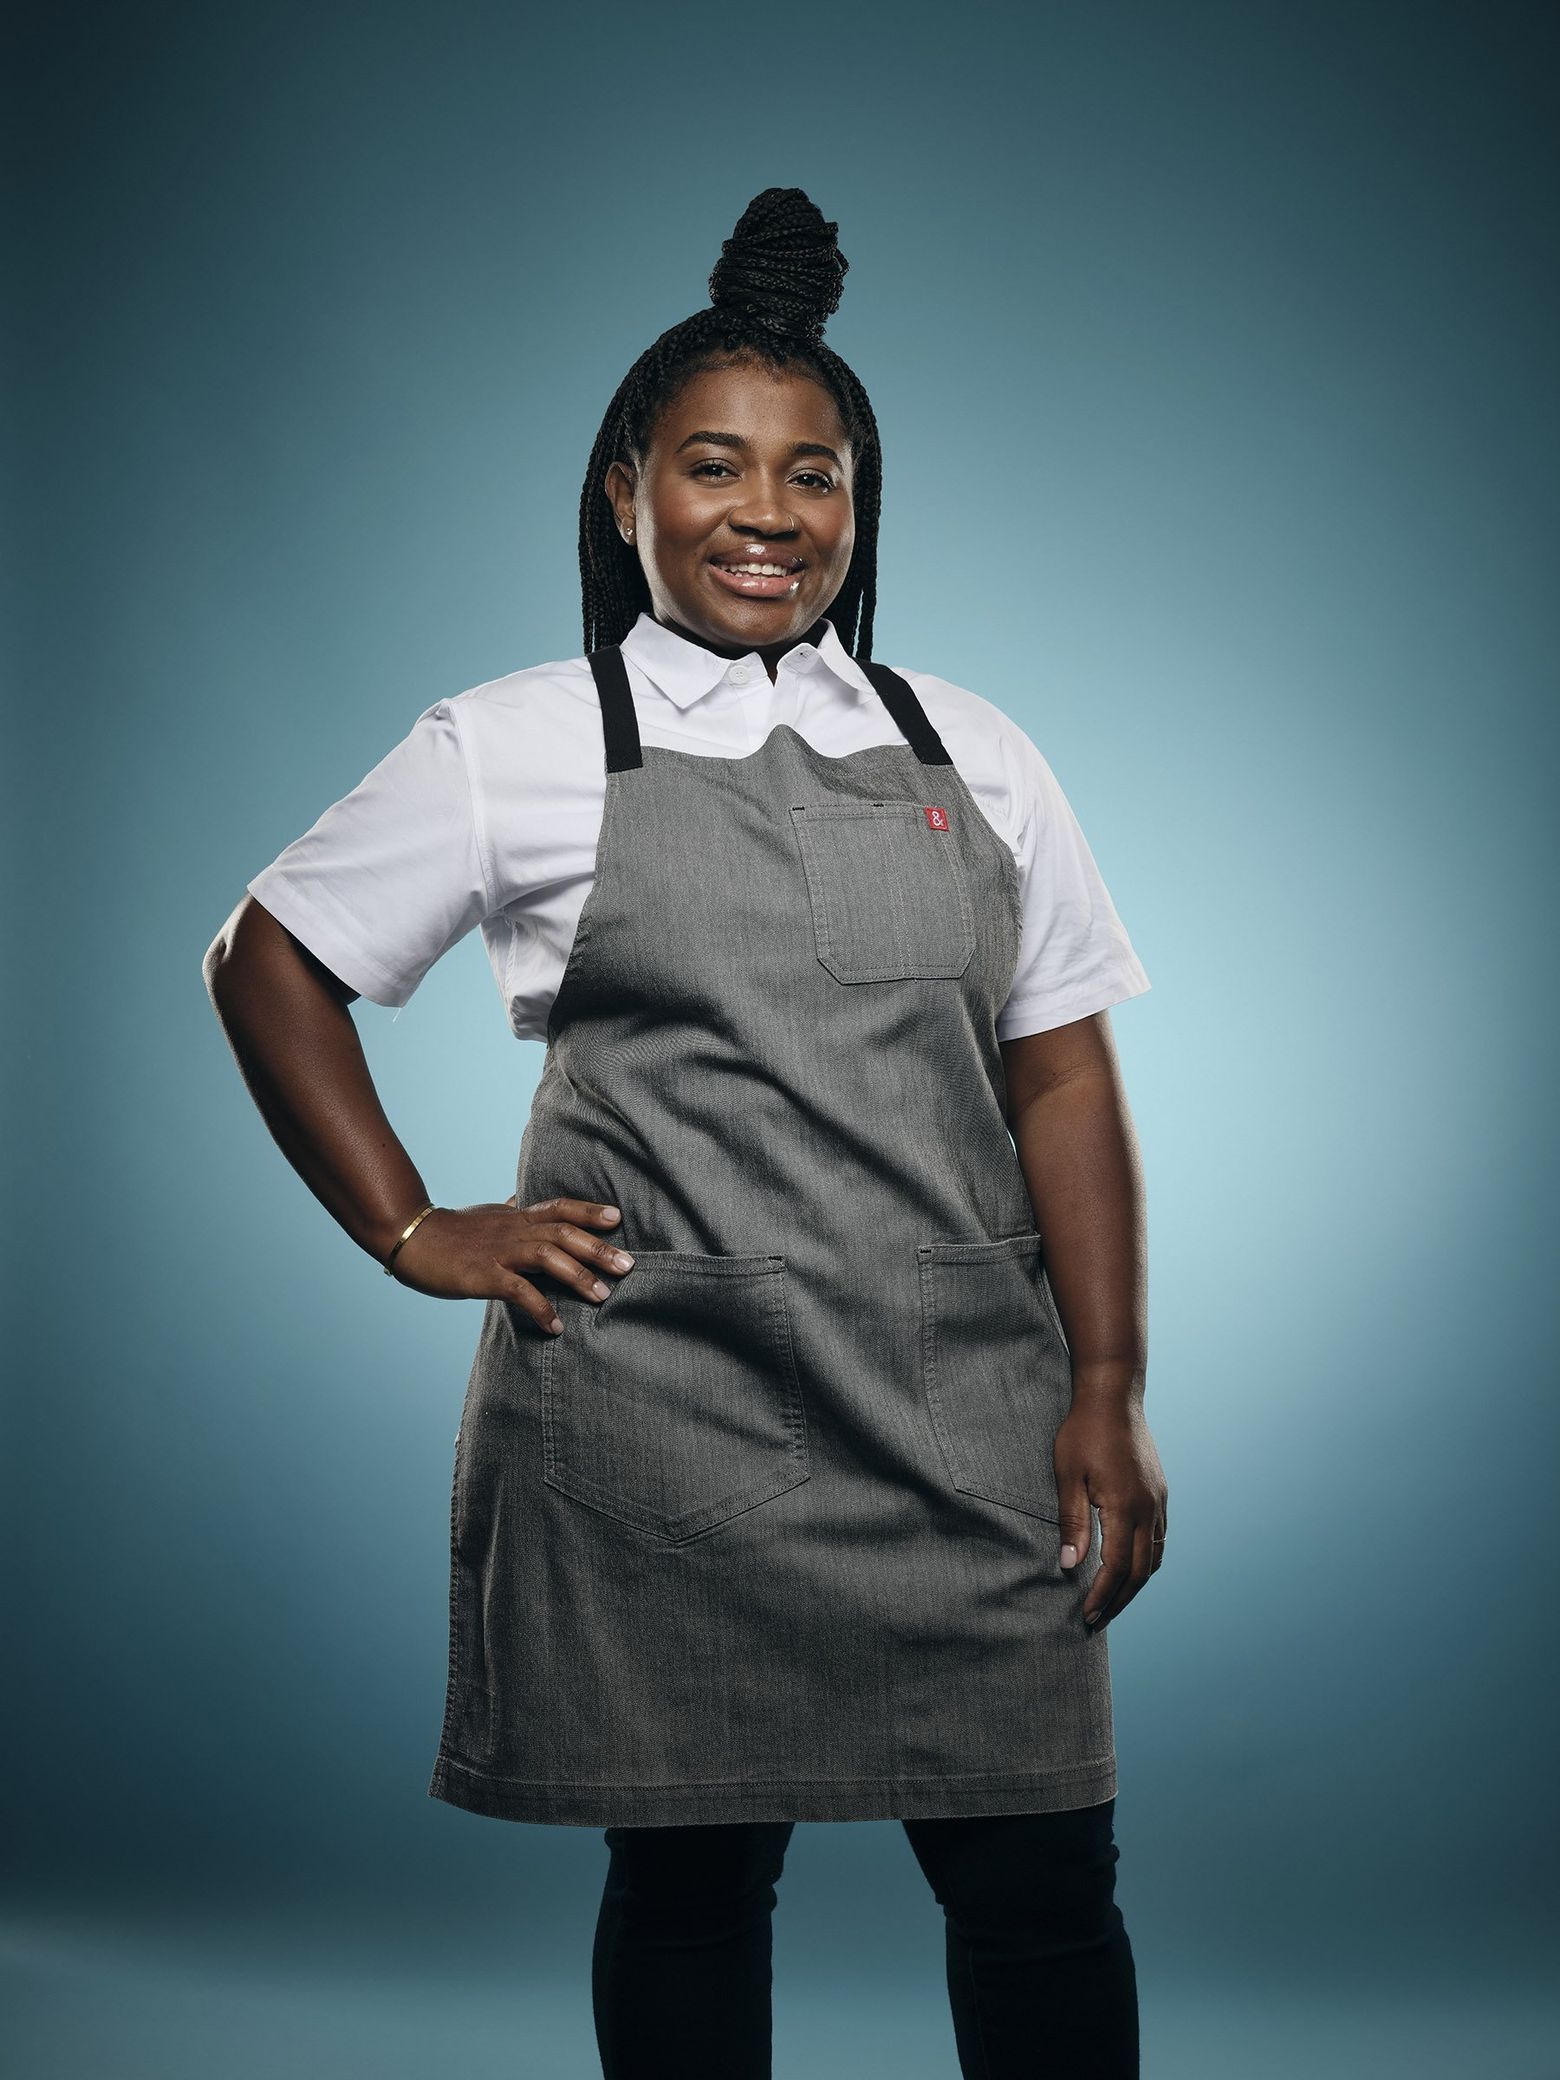 Seattle chef Devonnie Black brings home cooking to Gordon Ramsay's